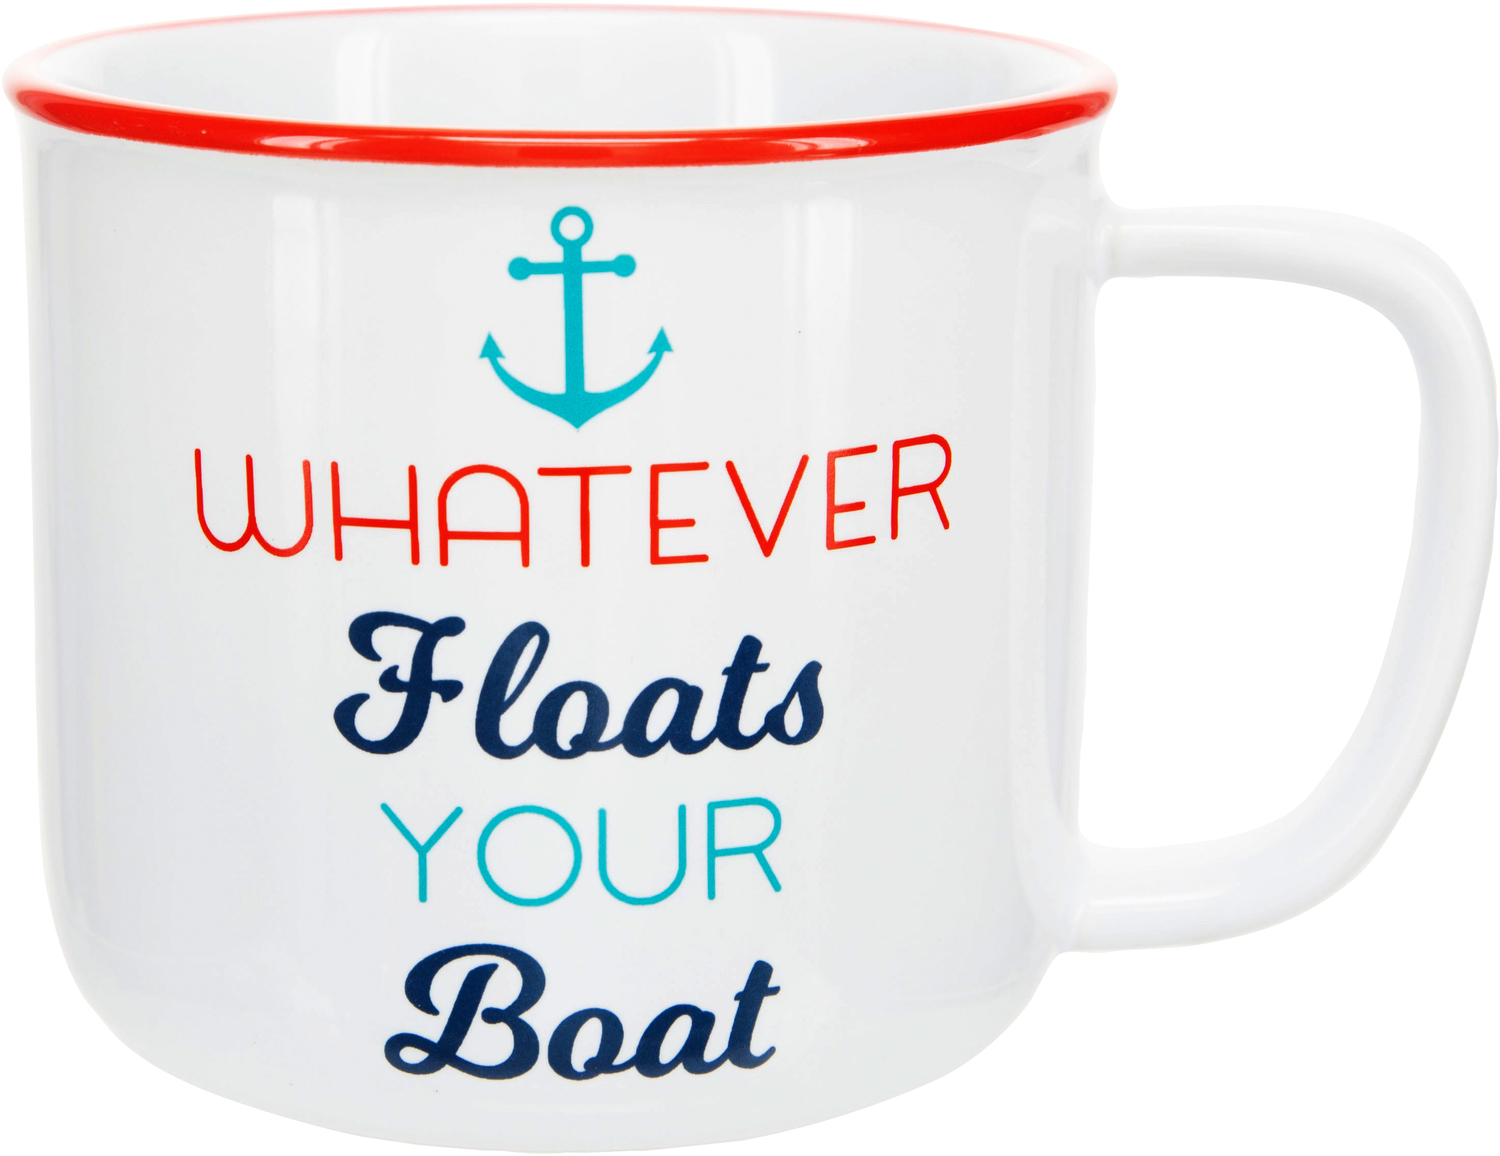 Floats Your Boat by We People - Floats Your Boat - 17 oz Mug